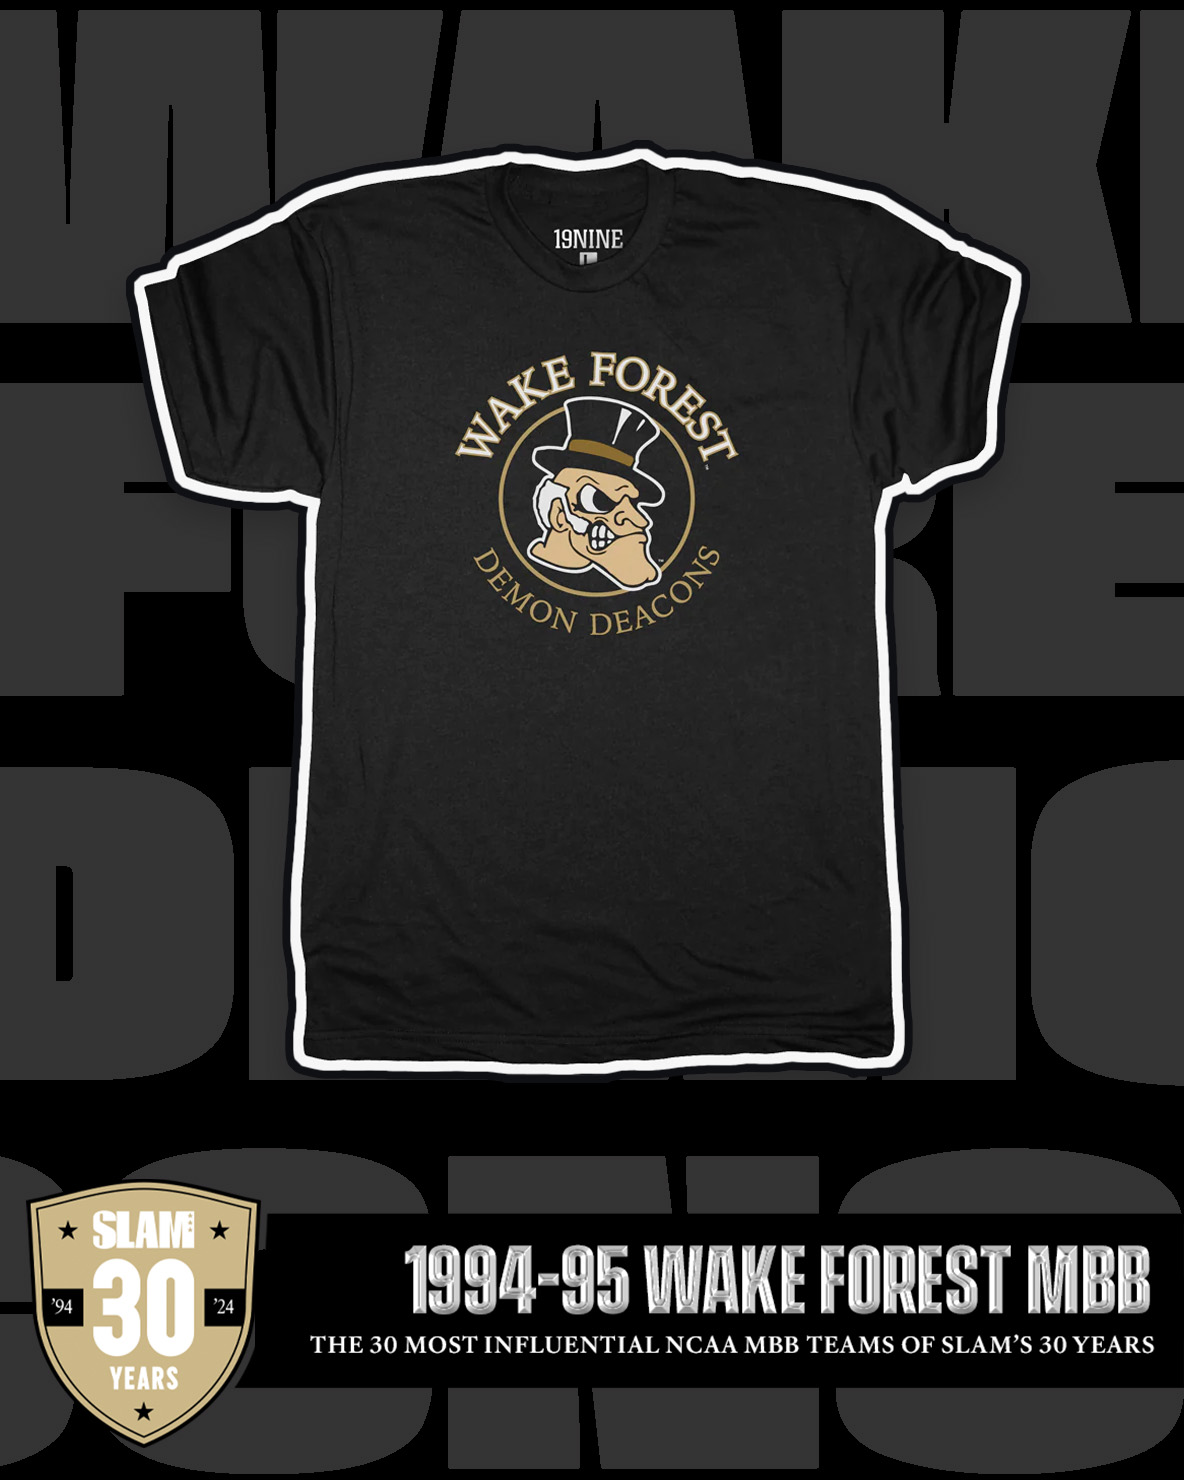 The 30 Most Influential NCAA MBB Teams of SLAM’s 30 Years: ‘94 Wake Forest